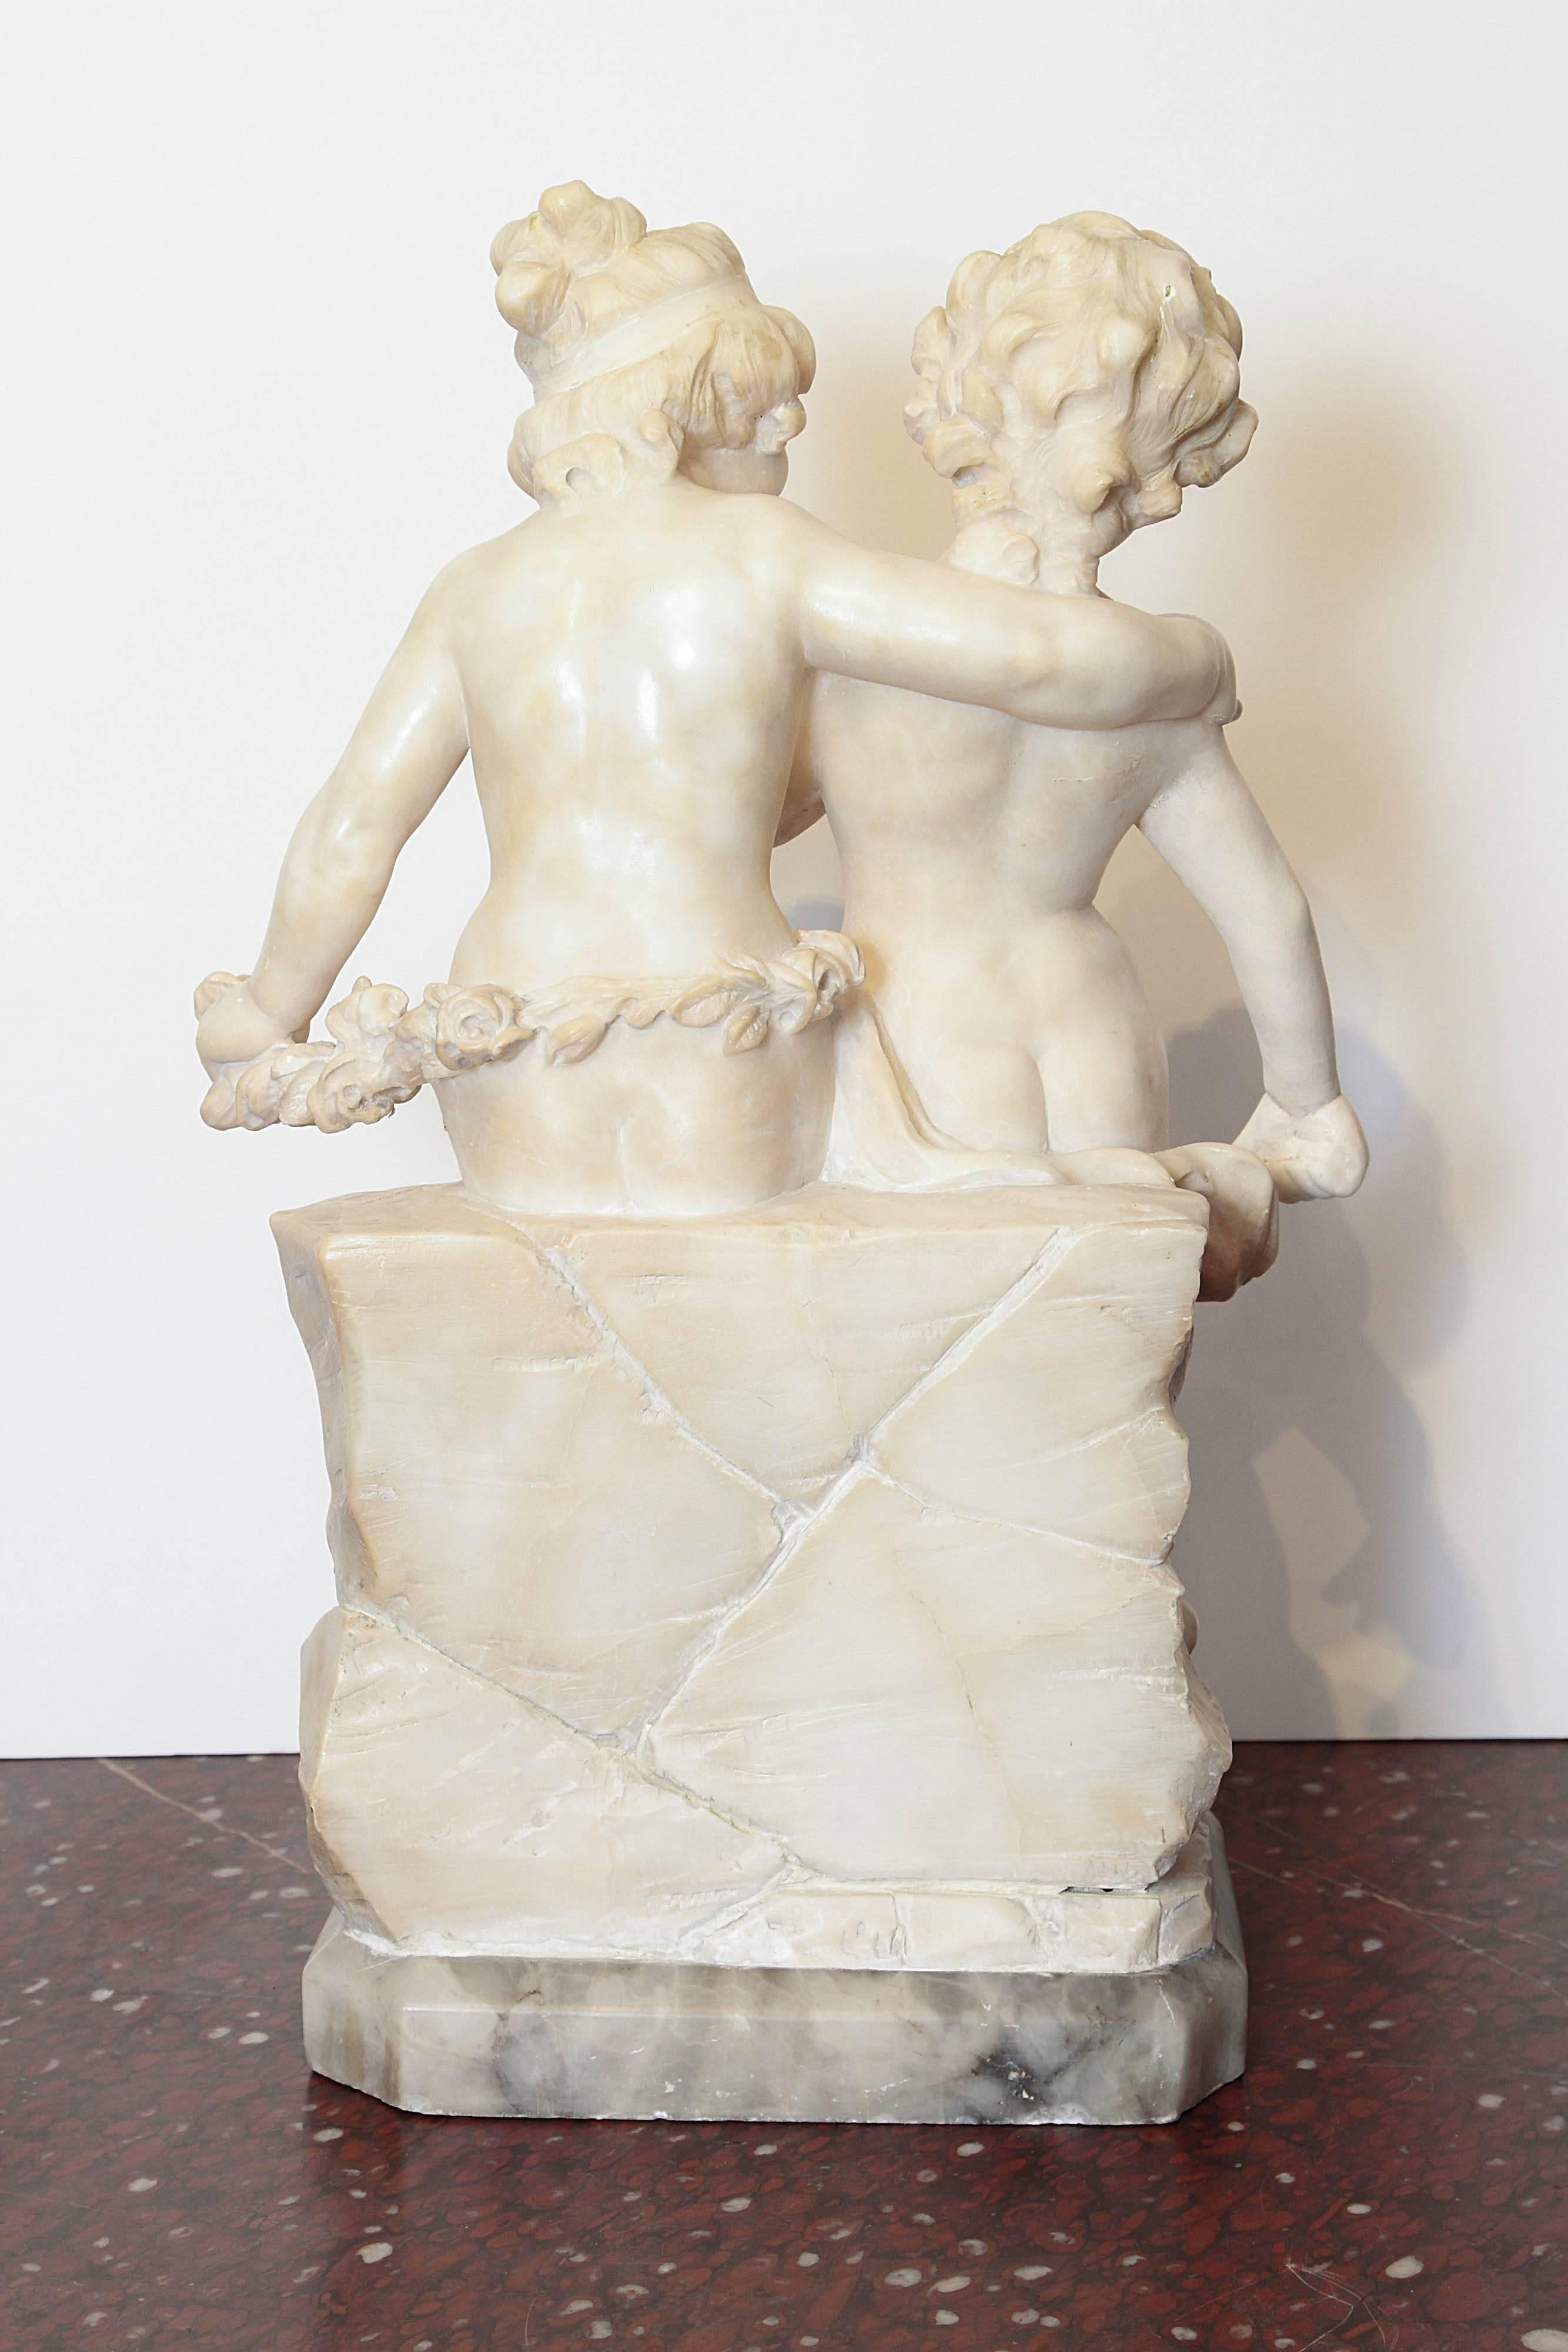 Renaissance 19th Century Italian Marble Sculpture of Two Children Sitting on a Wall